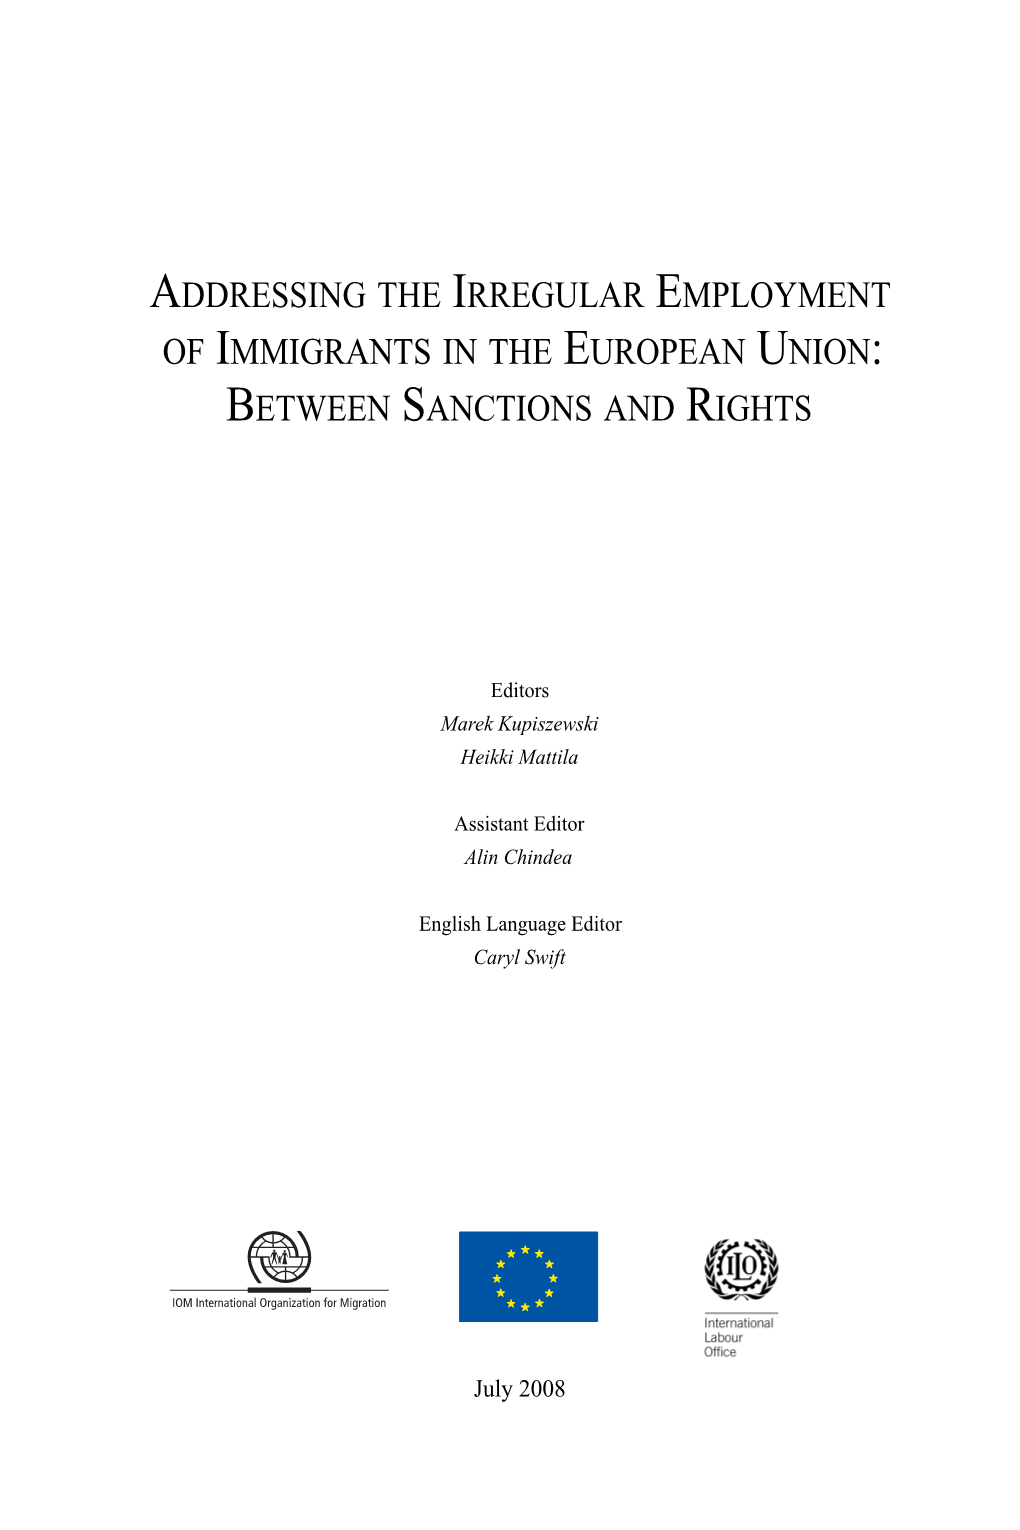 Addressing the Irregular Employment of Immigrants in the European Union: Between Sanctions and Rights